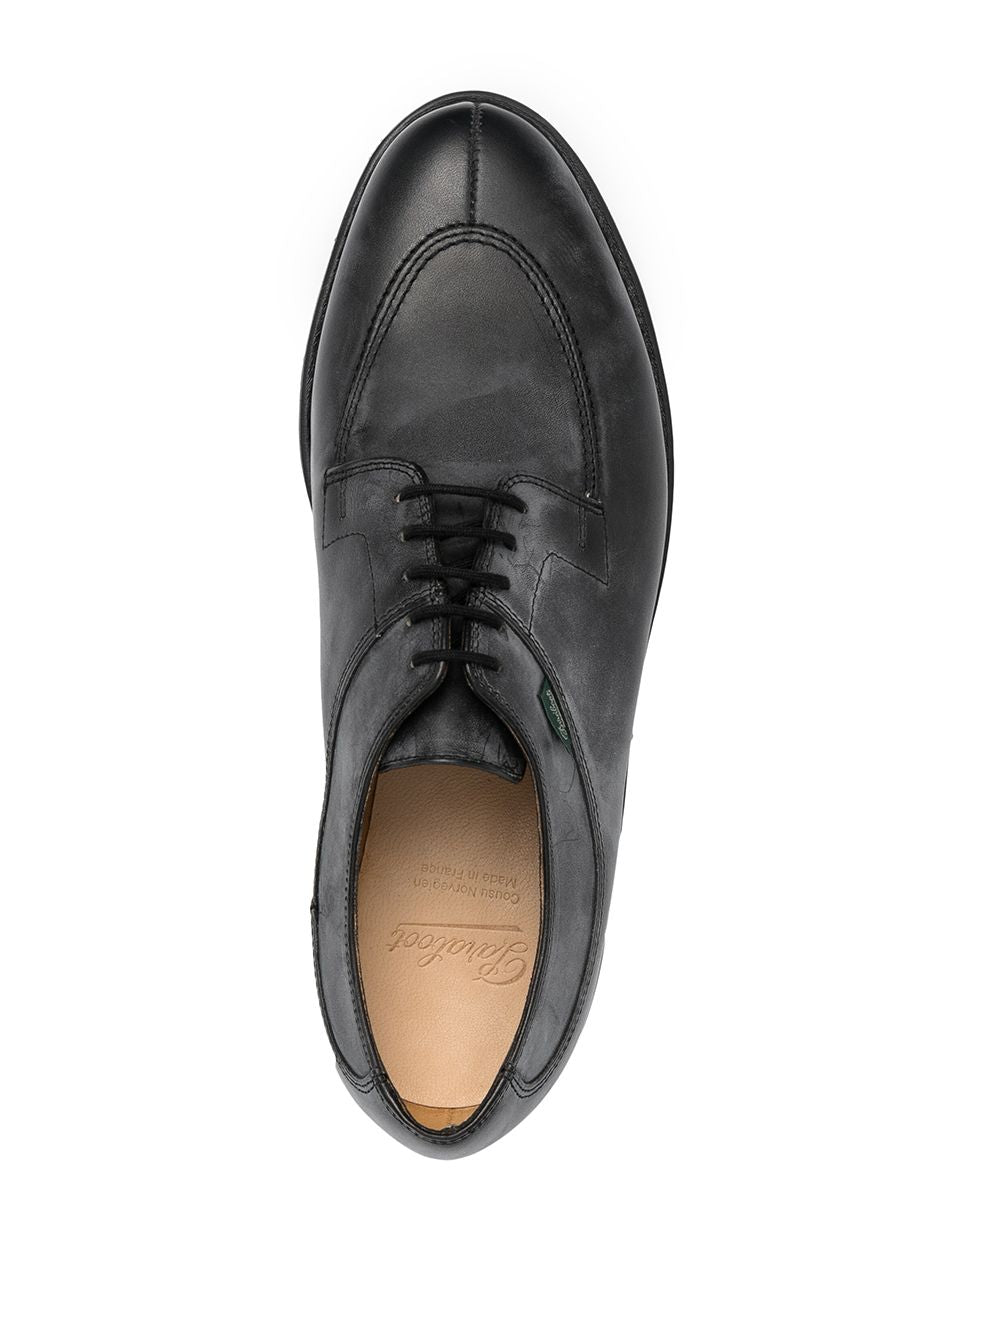 Black leather distressed leather lace-up shoes